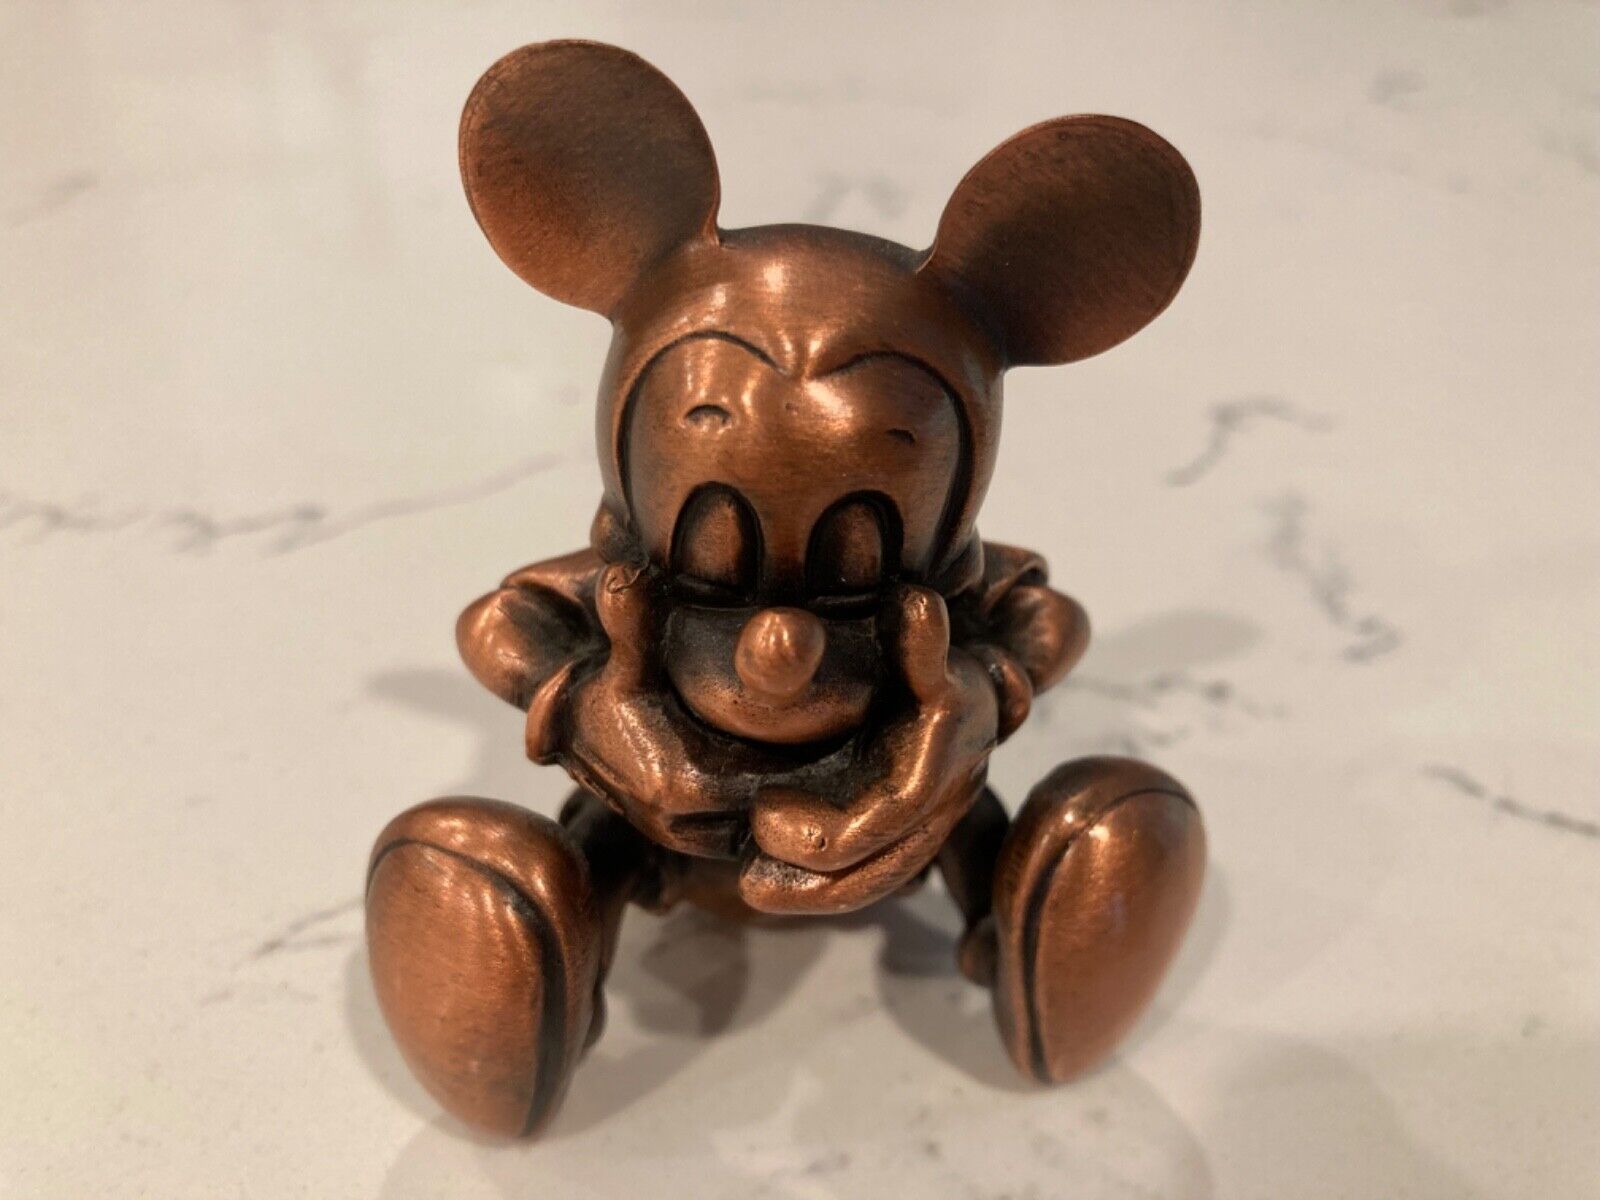 VINTAGE DISNEY MICKEY MOUSE - Heavy Copper Colored Figurine -  2.5”